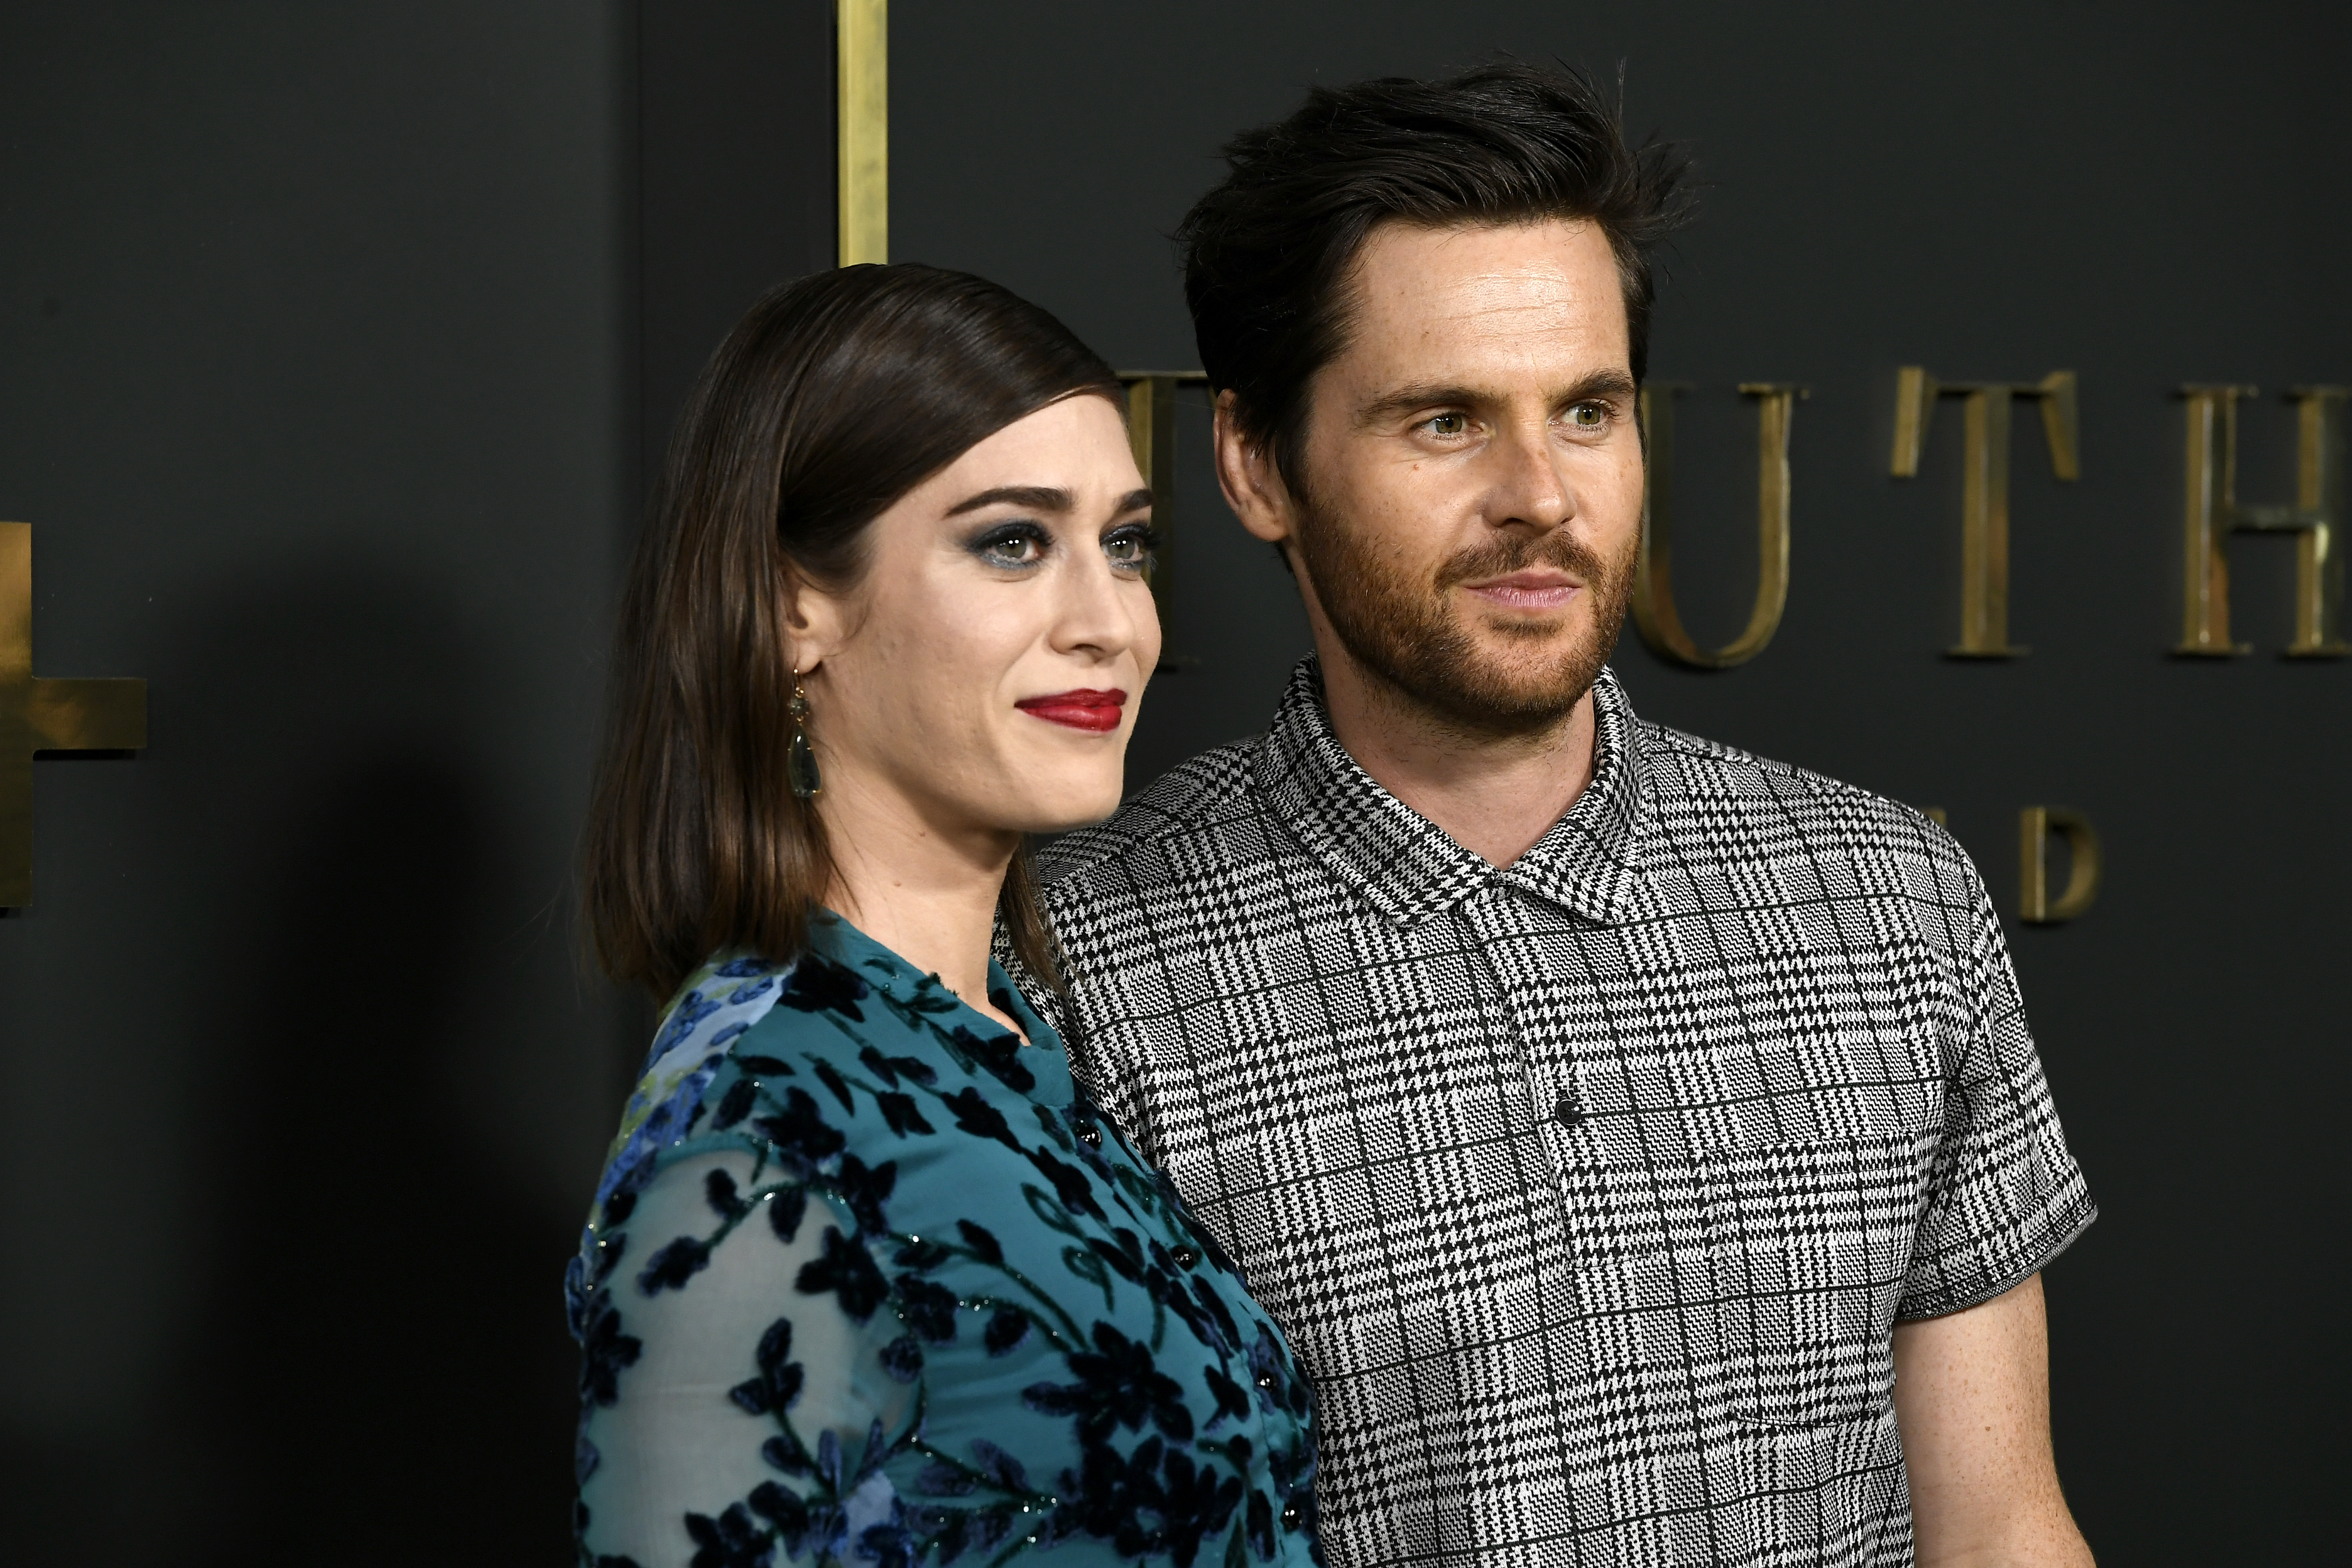 Lizzy Caplan and Tom Riley during the "Truth Be Told" Apple premiere at AMPAS Samuel Goldwyn Theater on November 11, 2019, in Beverly Hills, California. | Source: Getty Images